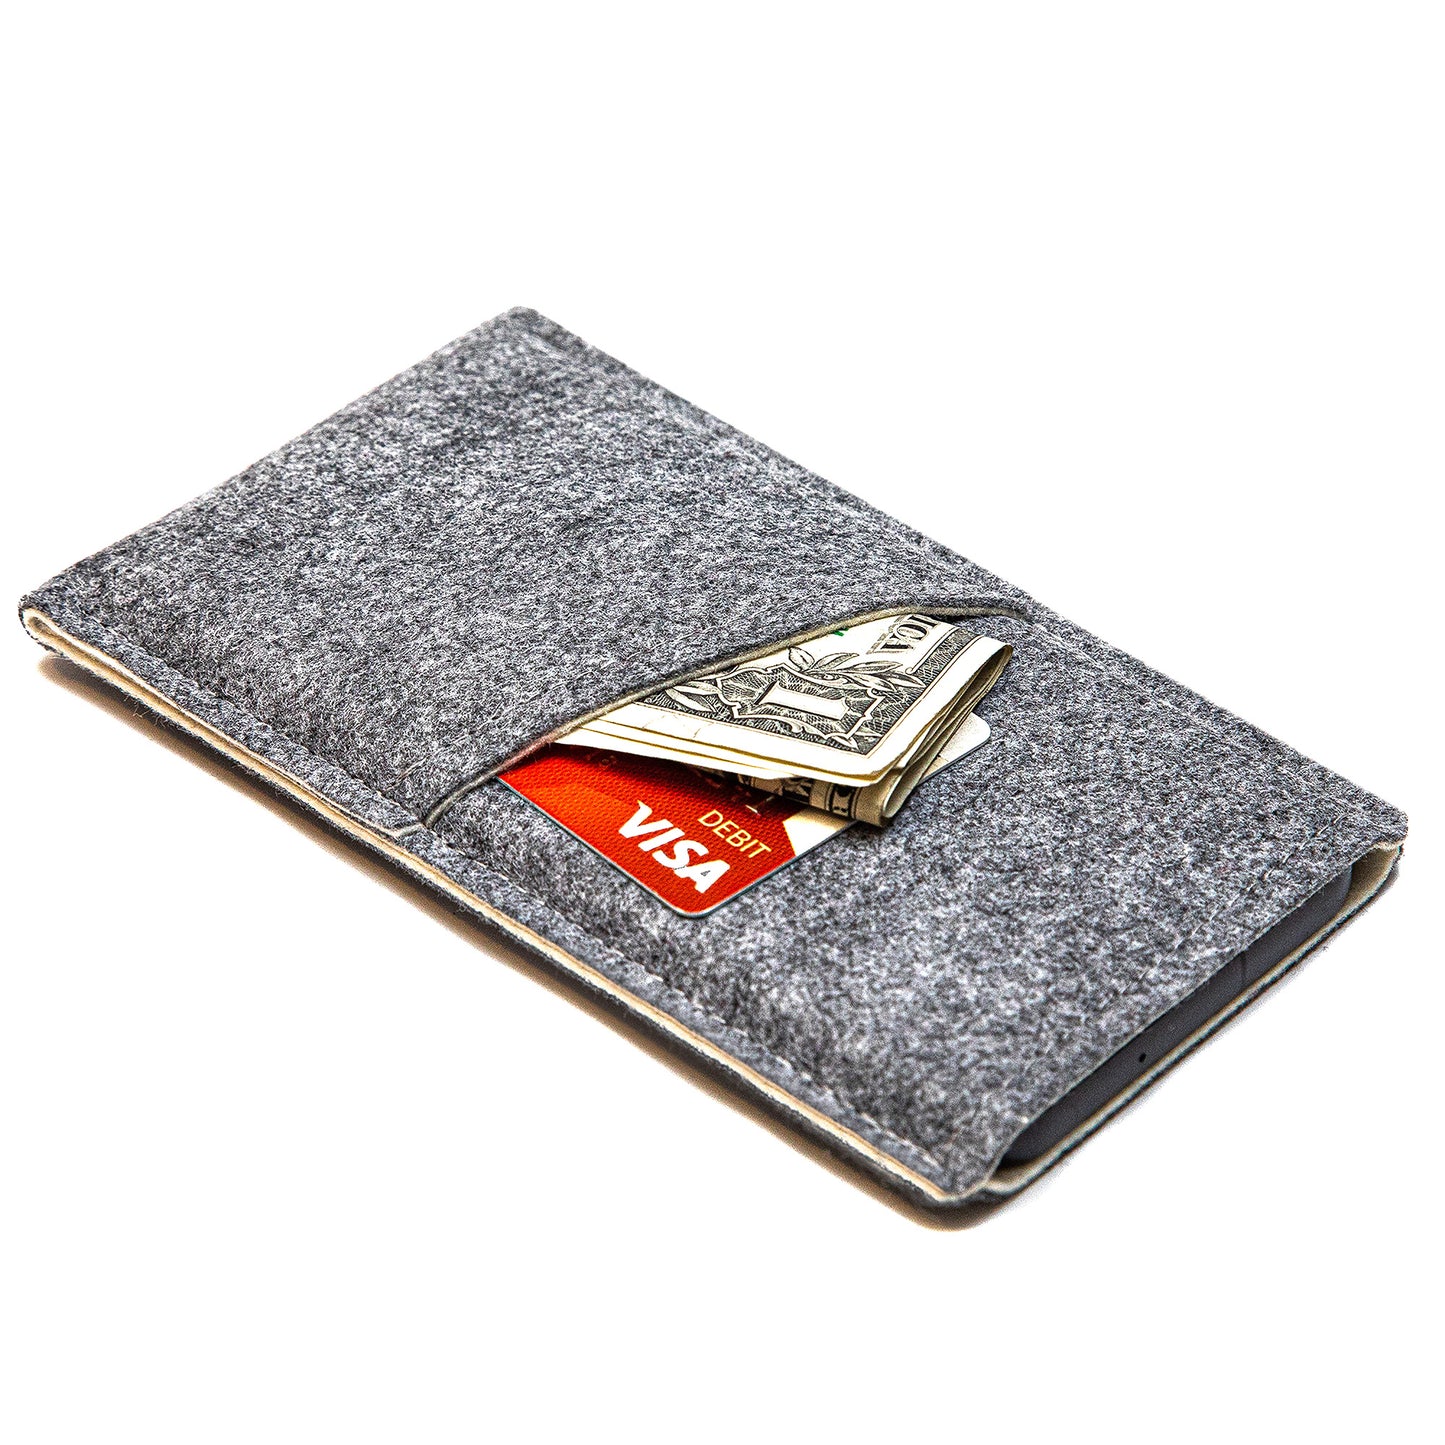 Handmade Felt Sleeve with Card Holder for Mobile Devices | Stylish, Protective, and Customizable Sizes